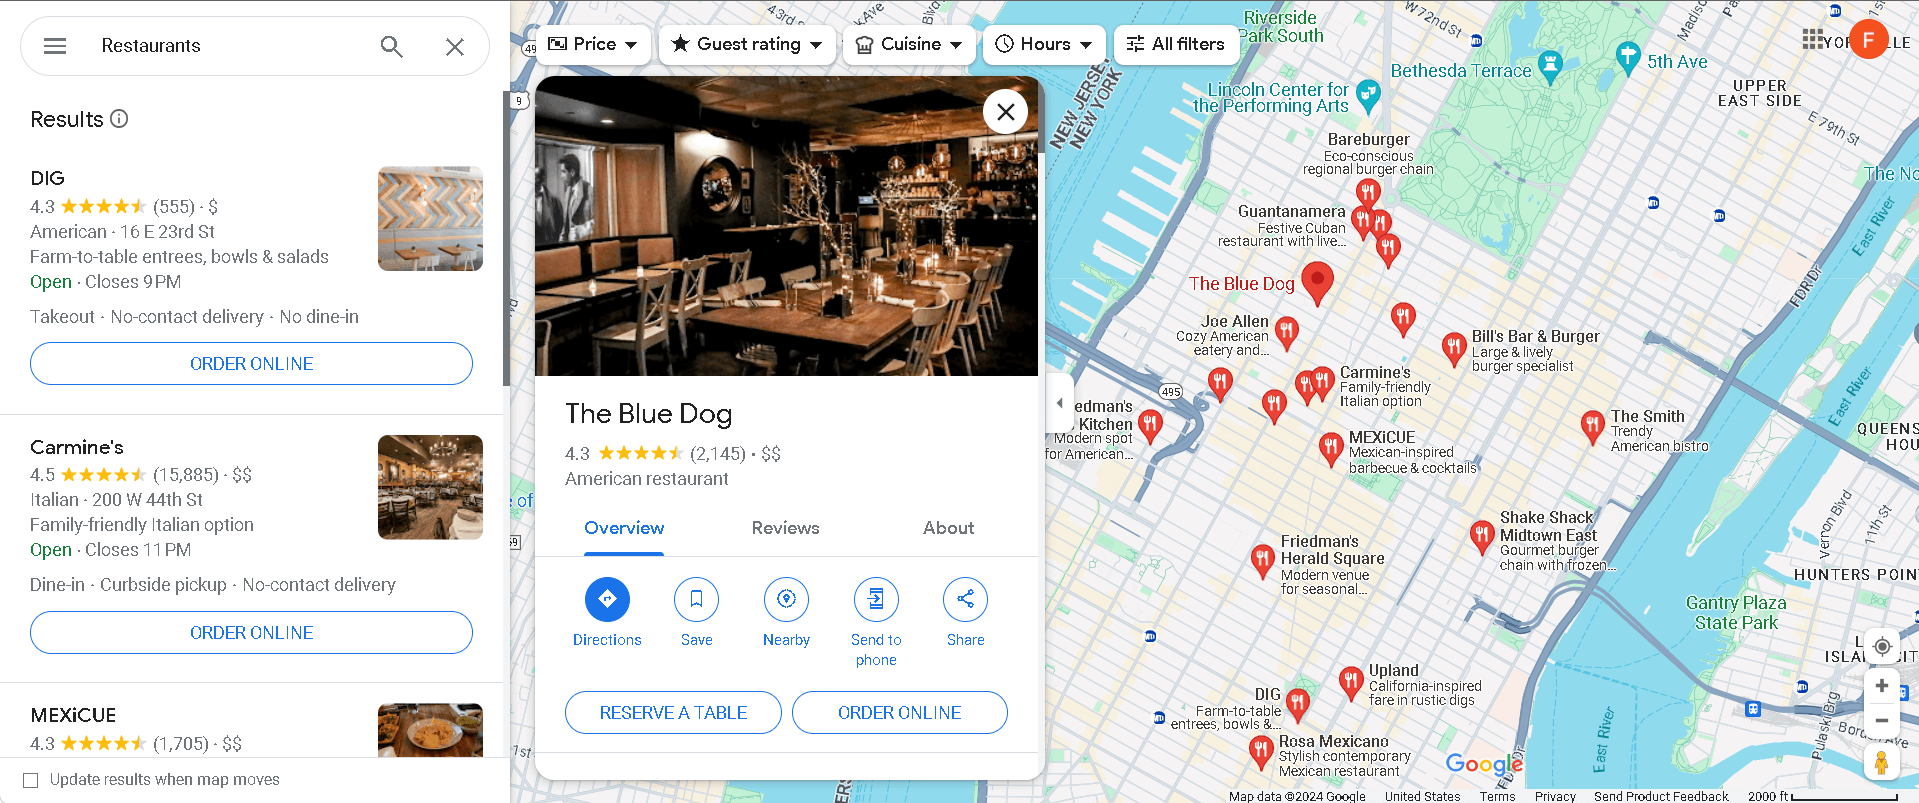 For restaurants, you can add other buttons instead of a "book now" button.